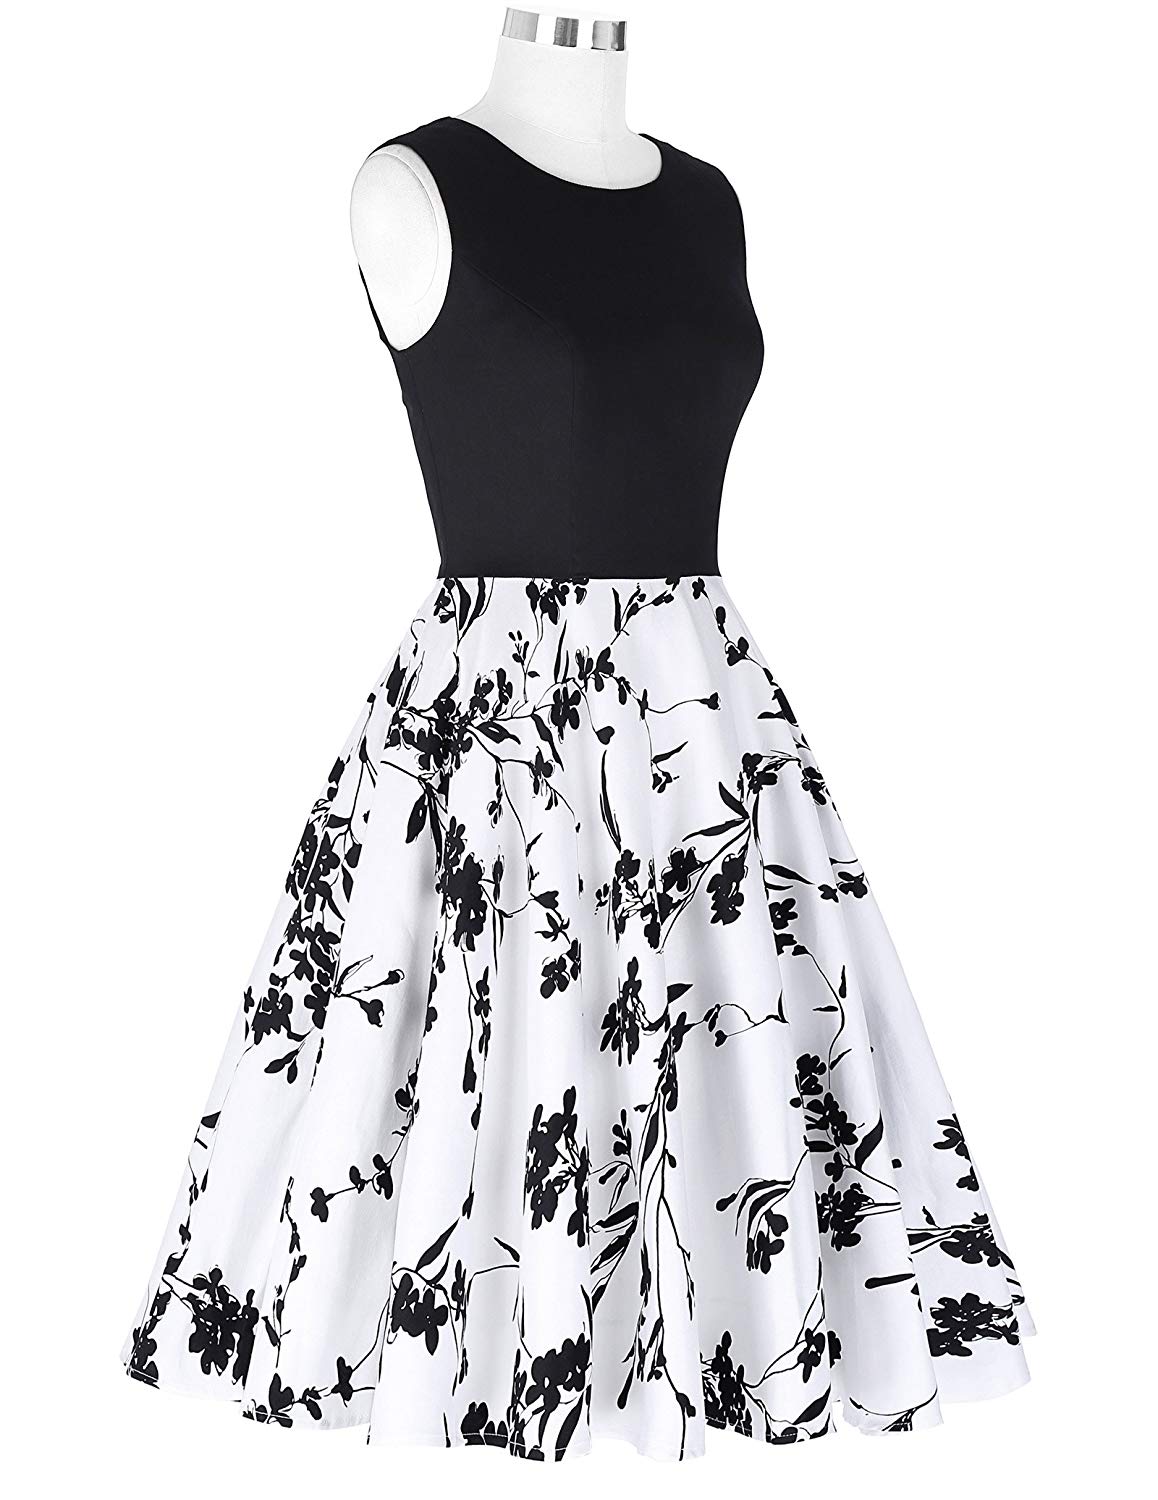 fabulous dresses for women - sleeveless fit and flare outfit with belt